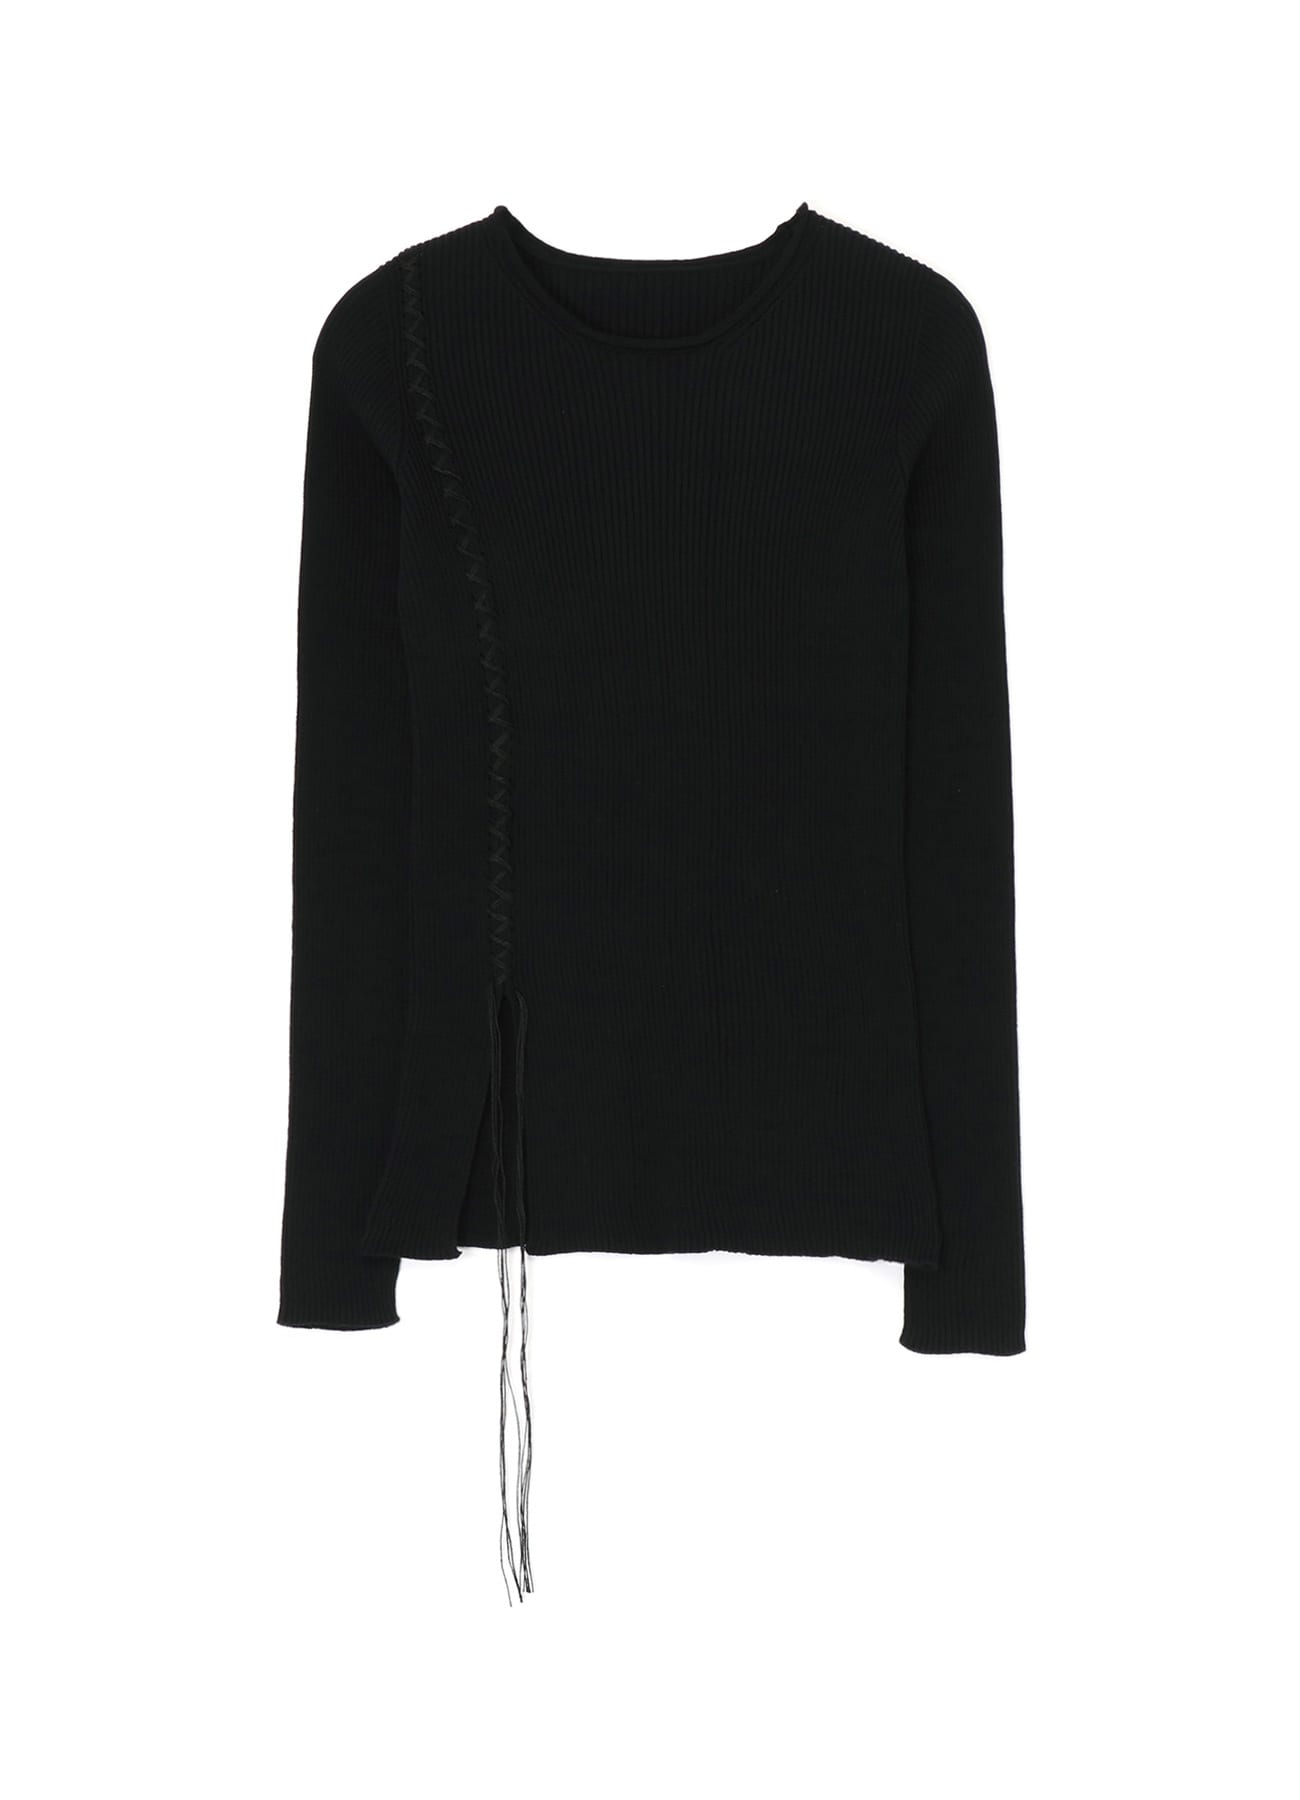 LACED UP LONG SLEEVE ROUND NECK RIBBED KNIT(S Black): Y's｜THE 